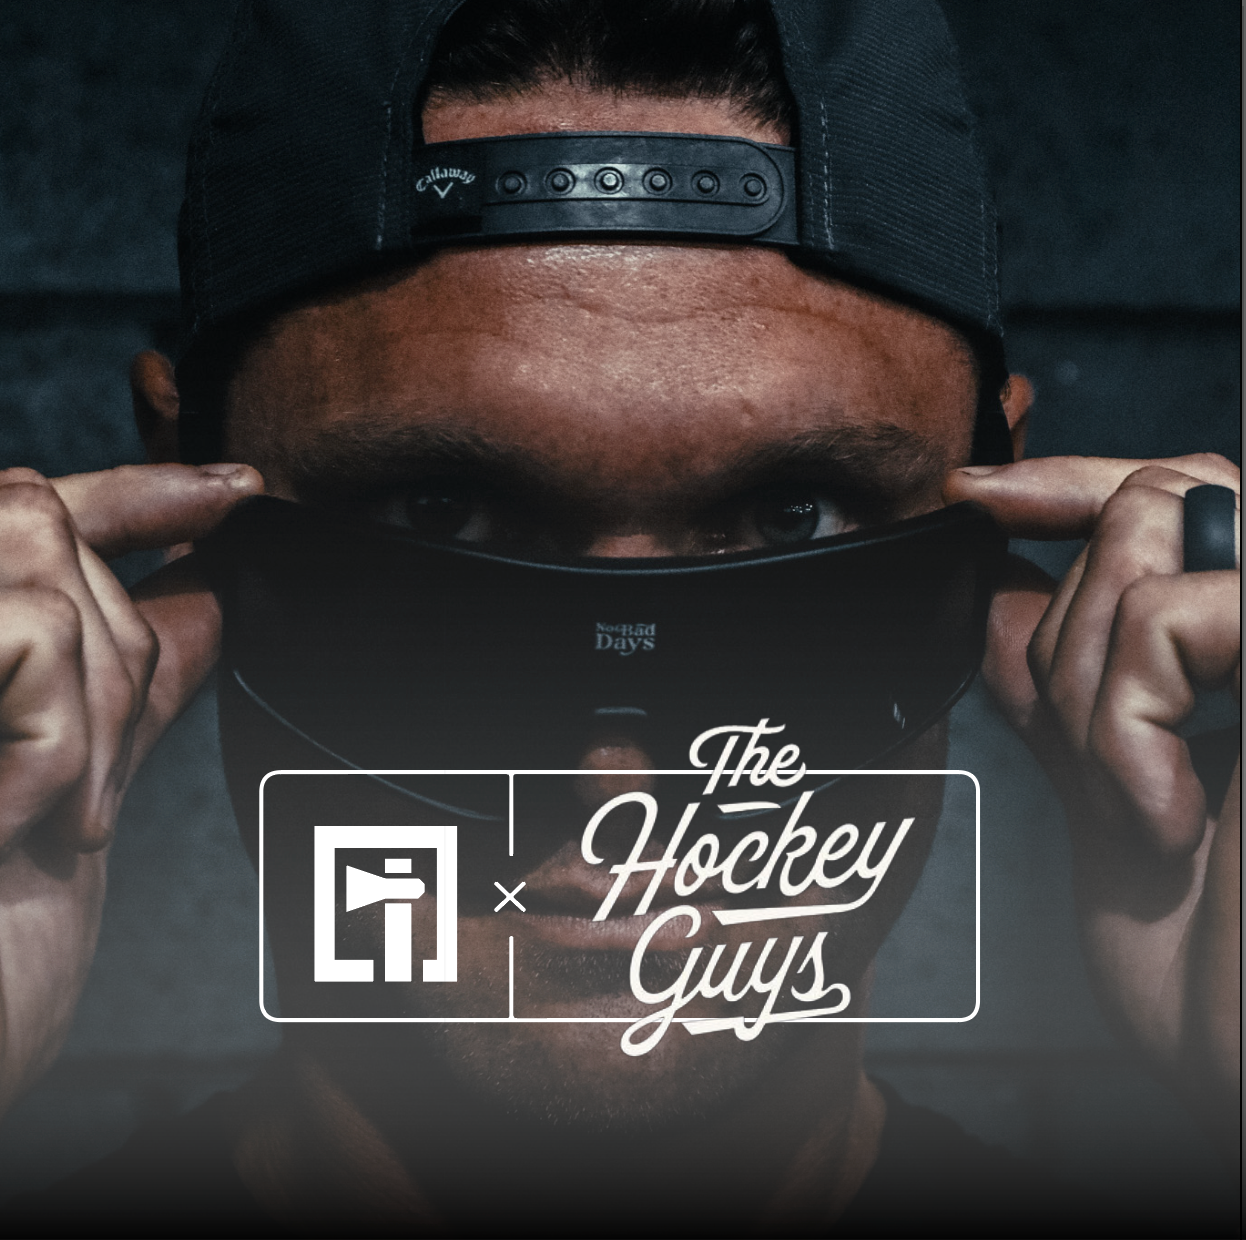 The Hockey Guys Collab With Tomahawk Shades To Make Limited Edition Pair Of Sunglasses!